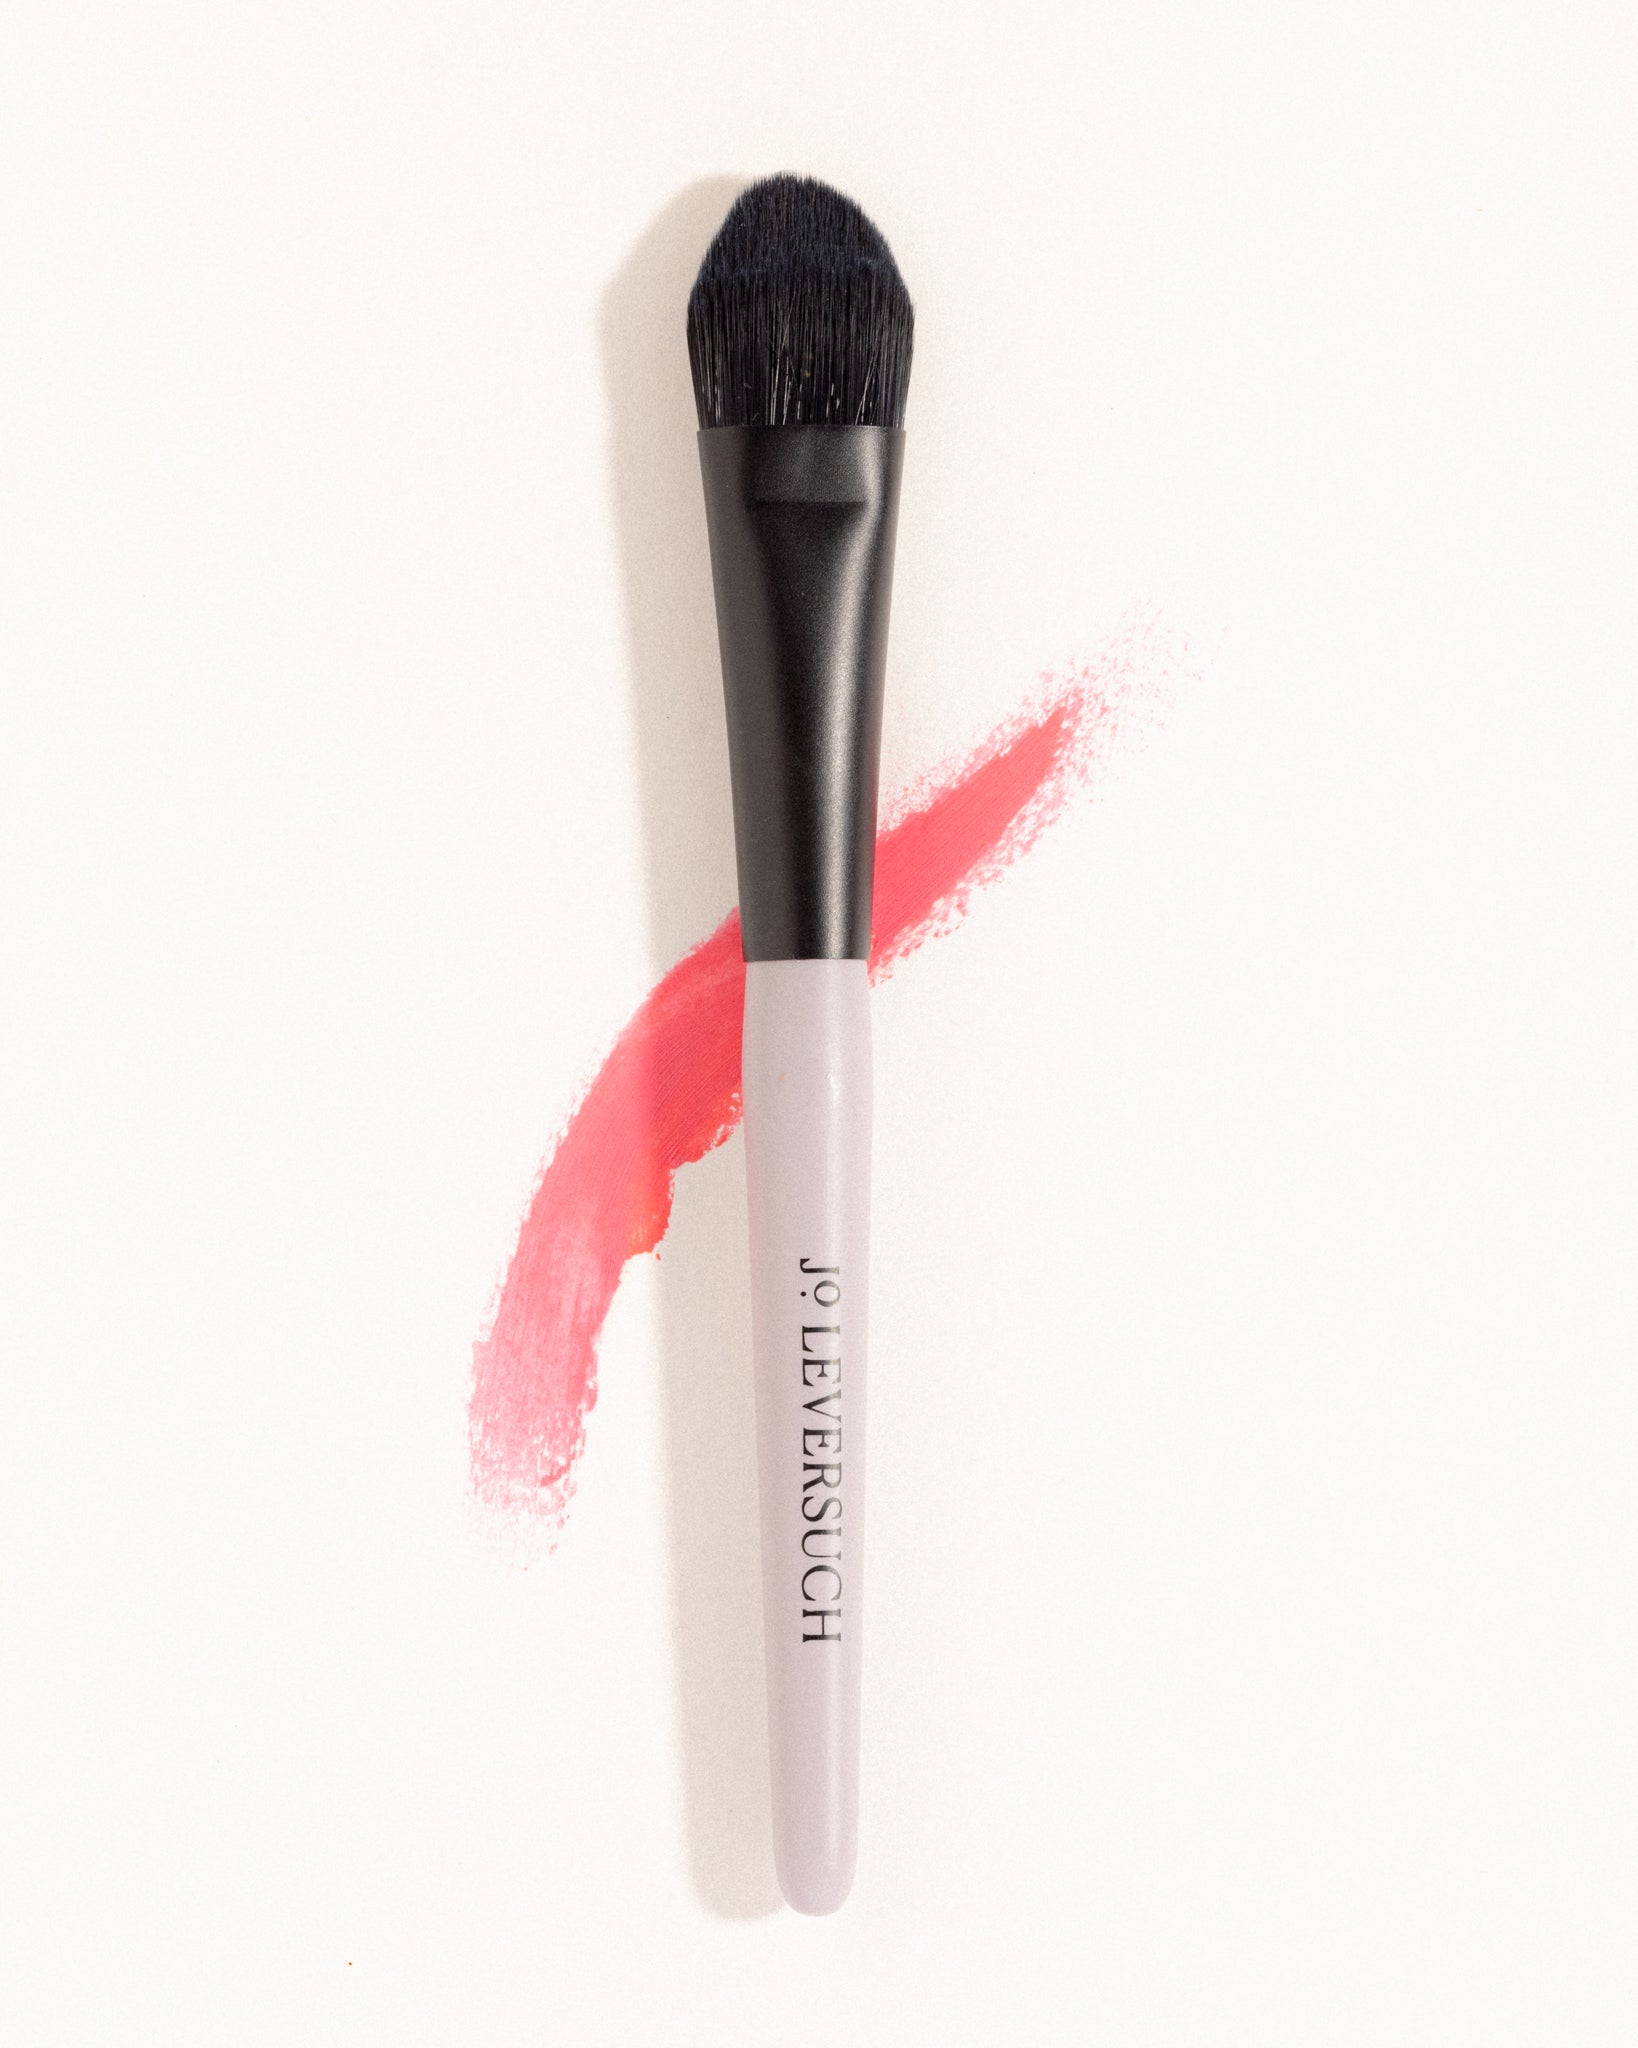 Untitled No 1 Jo Leversuch detailed makeup brush with synthetic hair  Edit alt text